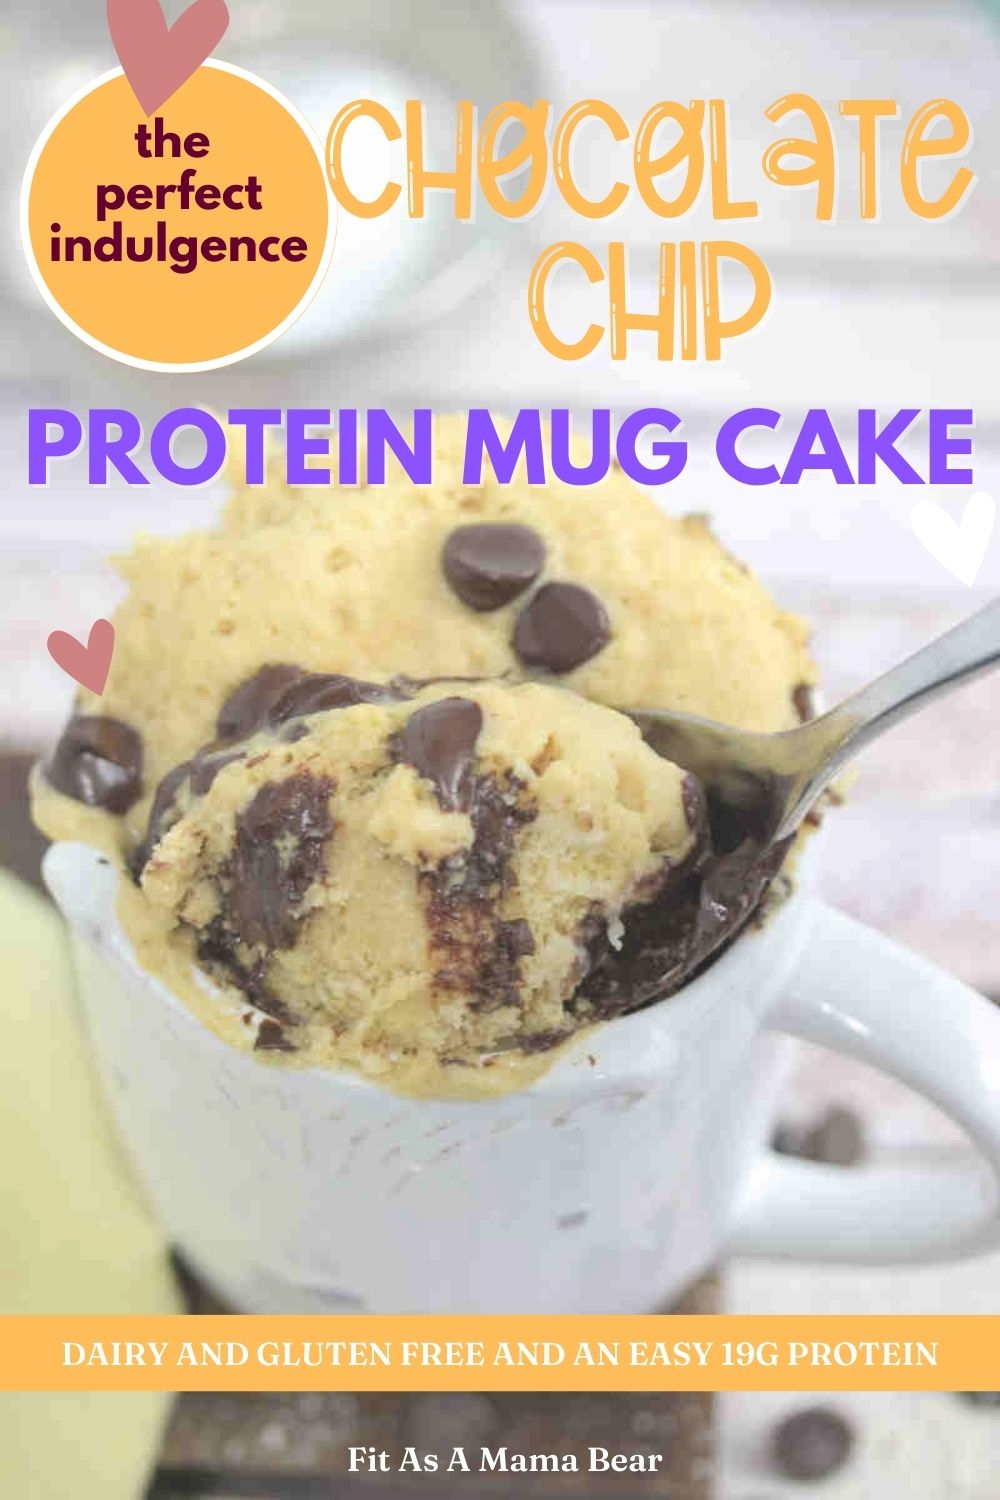 white mug with chocolate chip mug cake in it with a spoon on a wooden cutting board and text on the image.